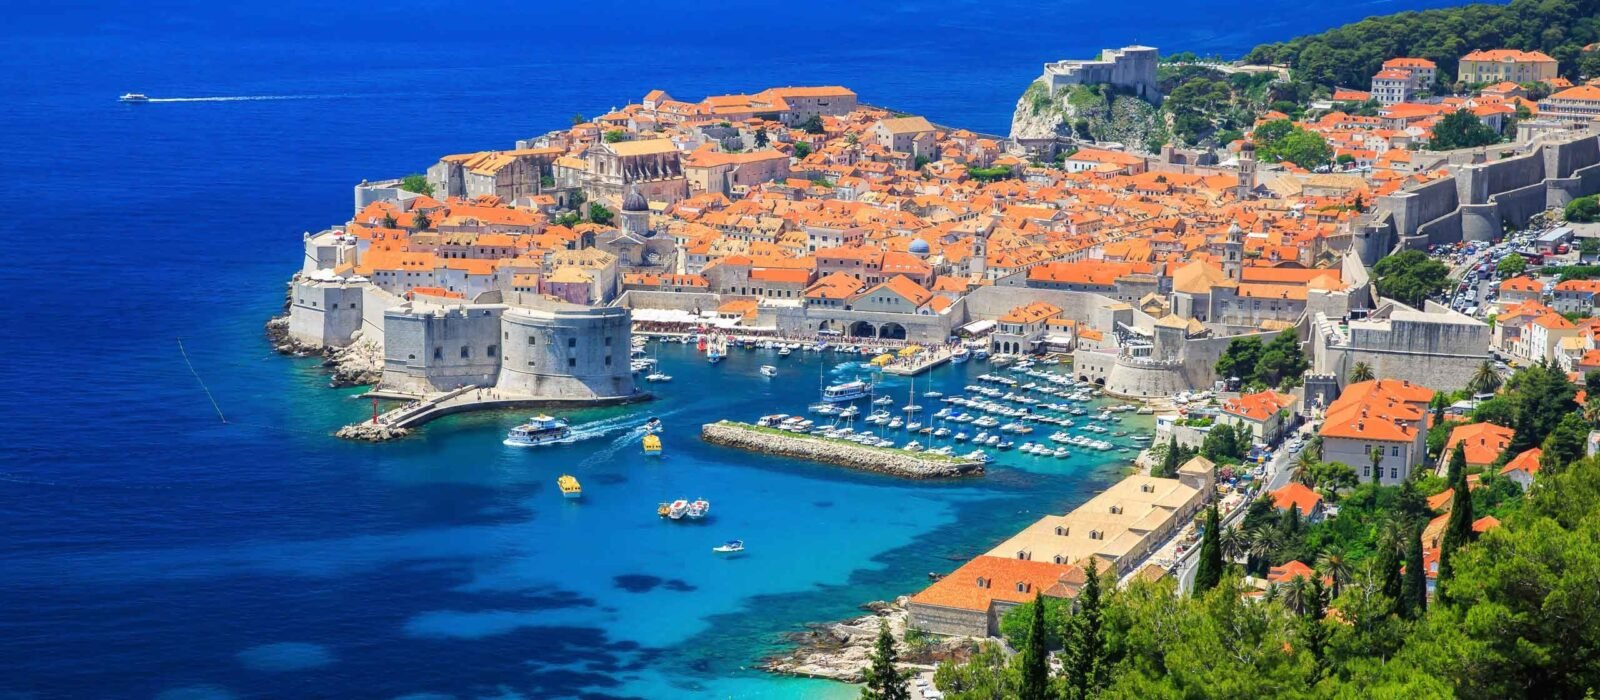 Aerial view of the old Croatian town and harbour, Dubrovnik